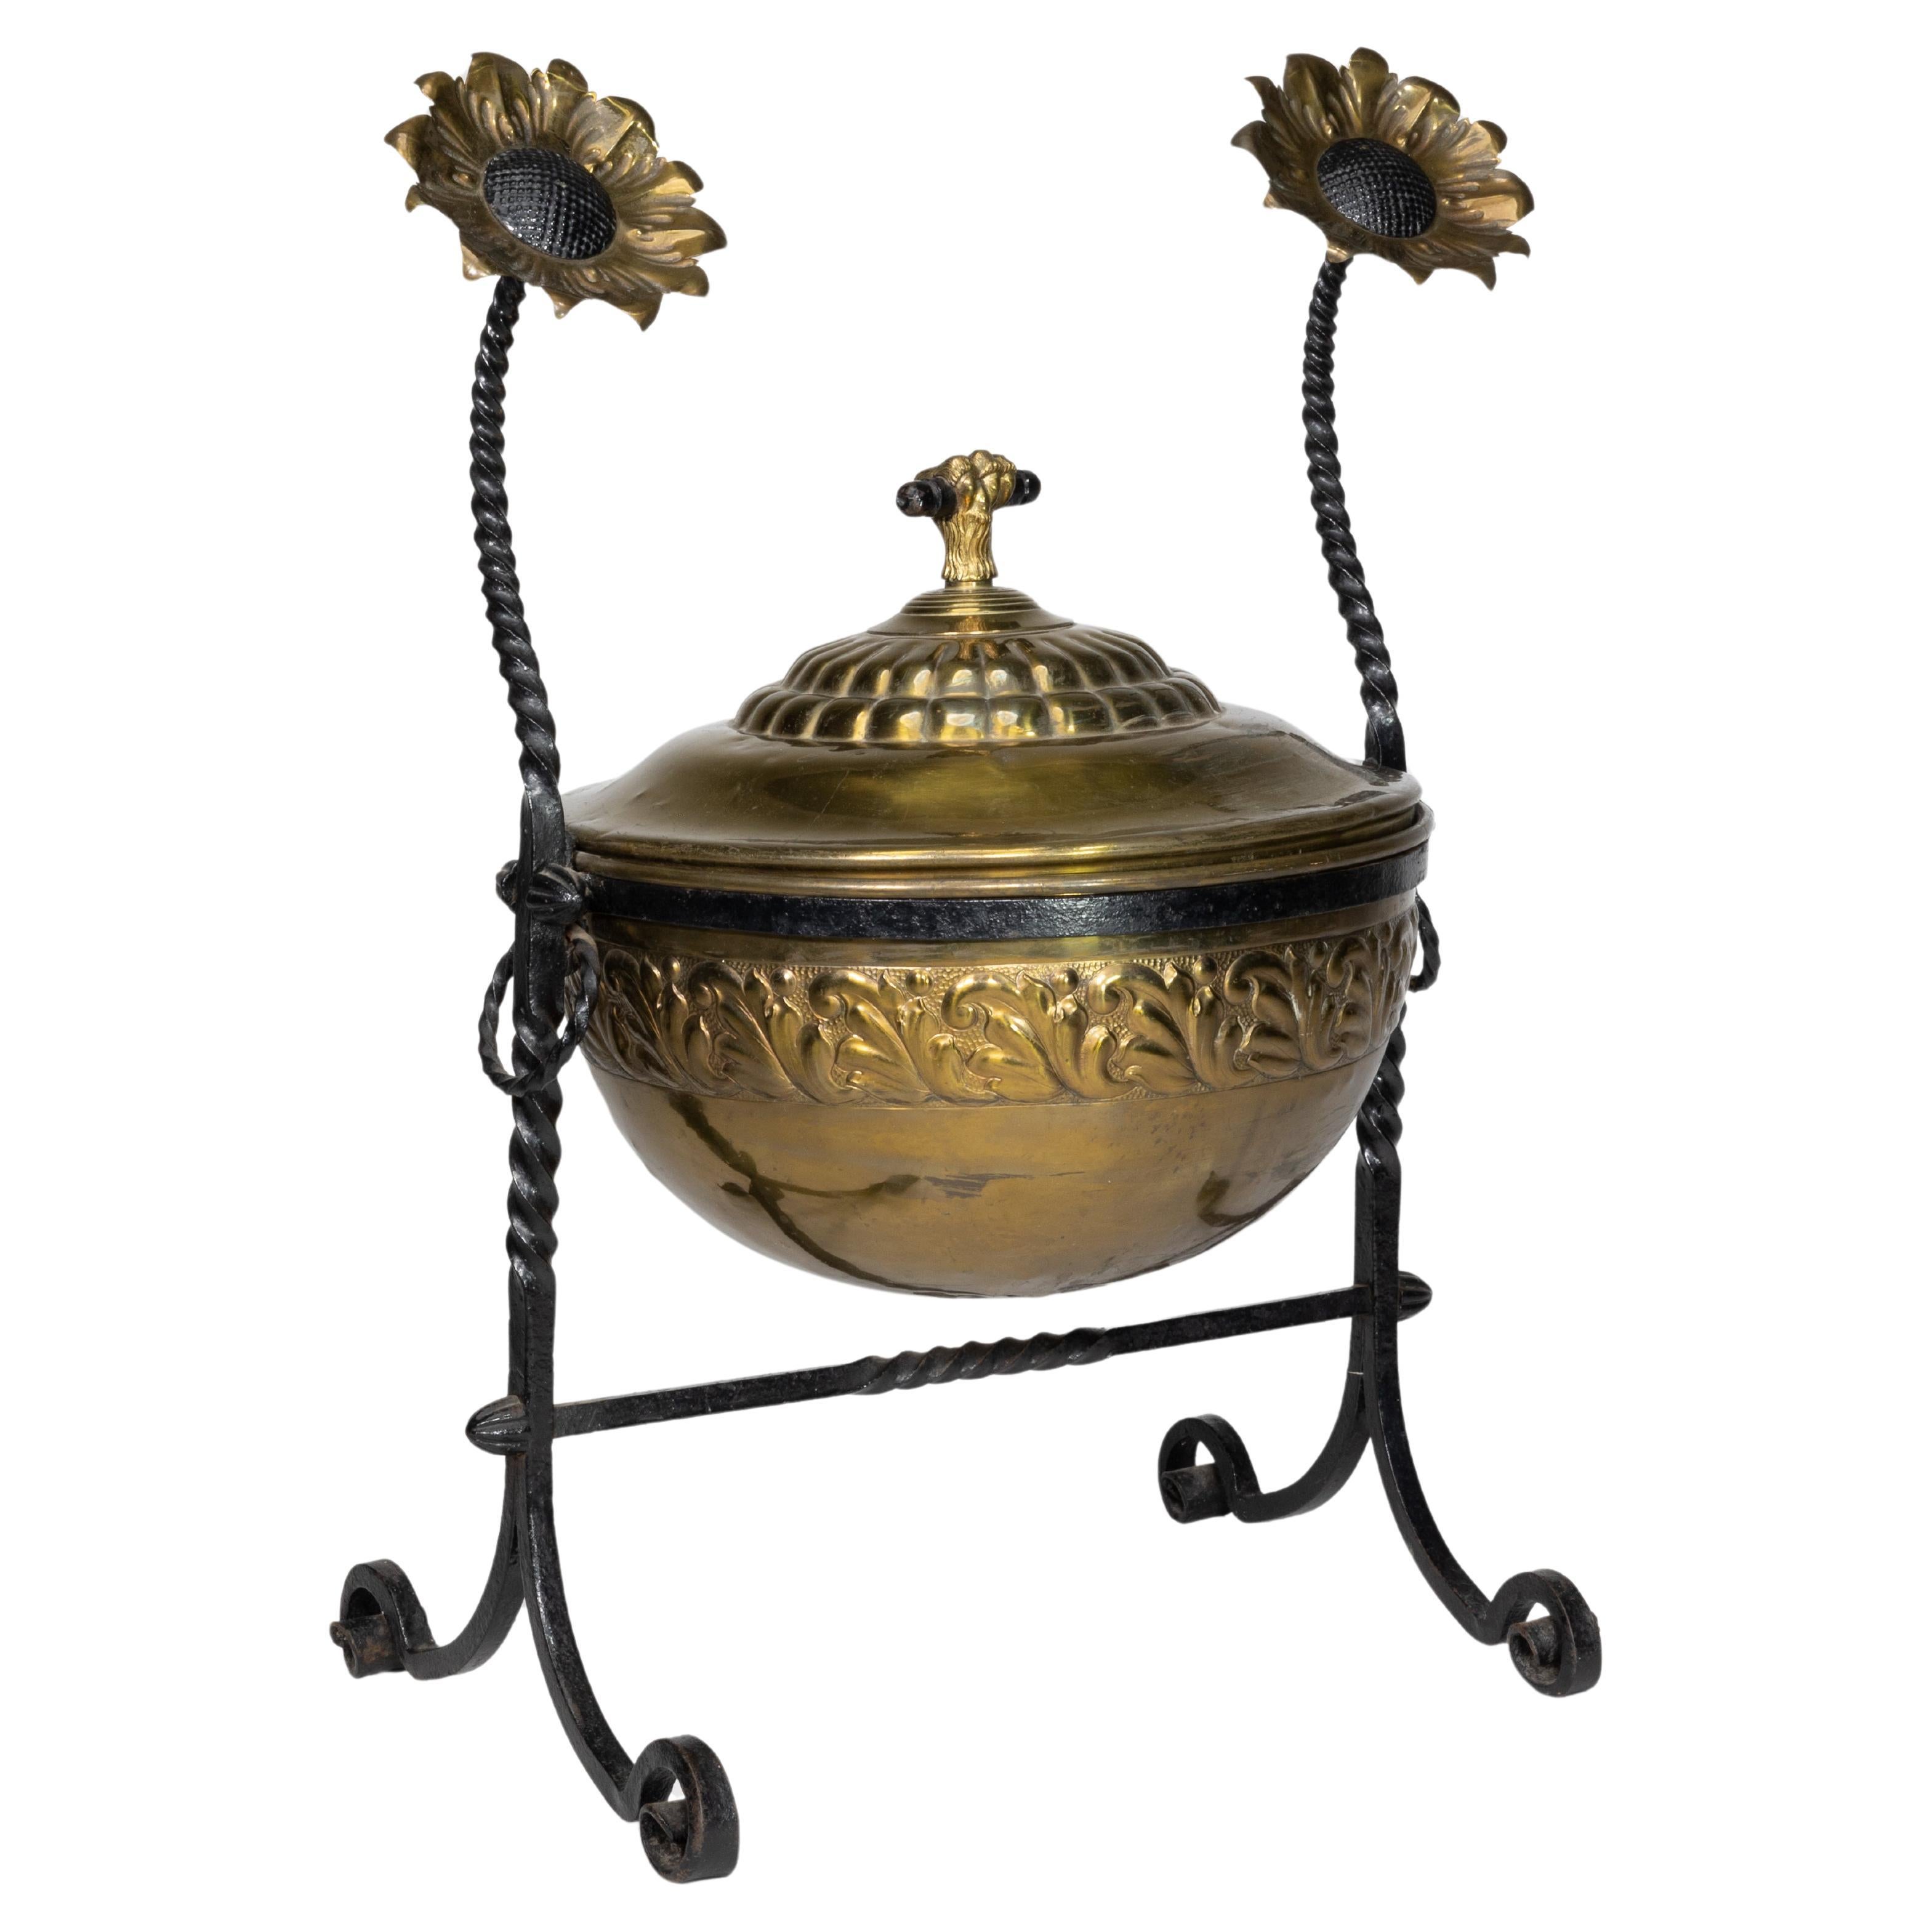 An Aesthetic Movement wrought iron and copper fire bucket with sunflower finials